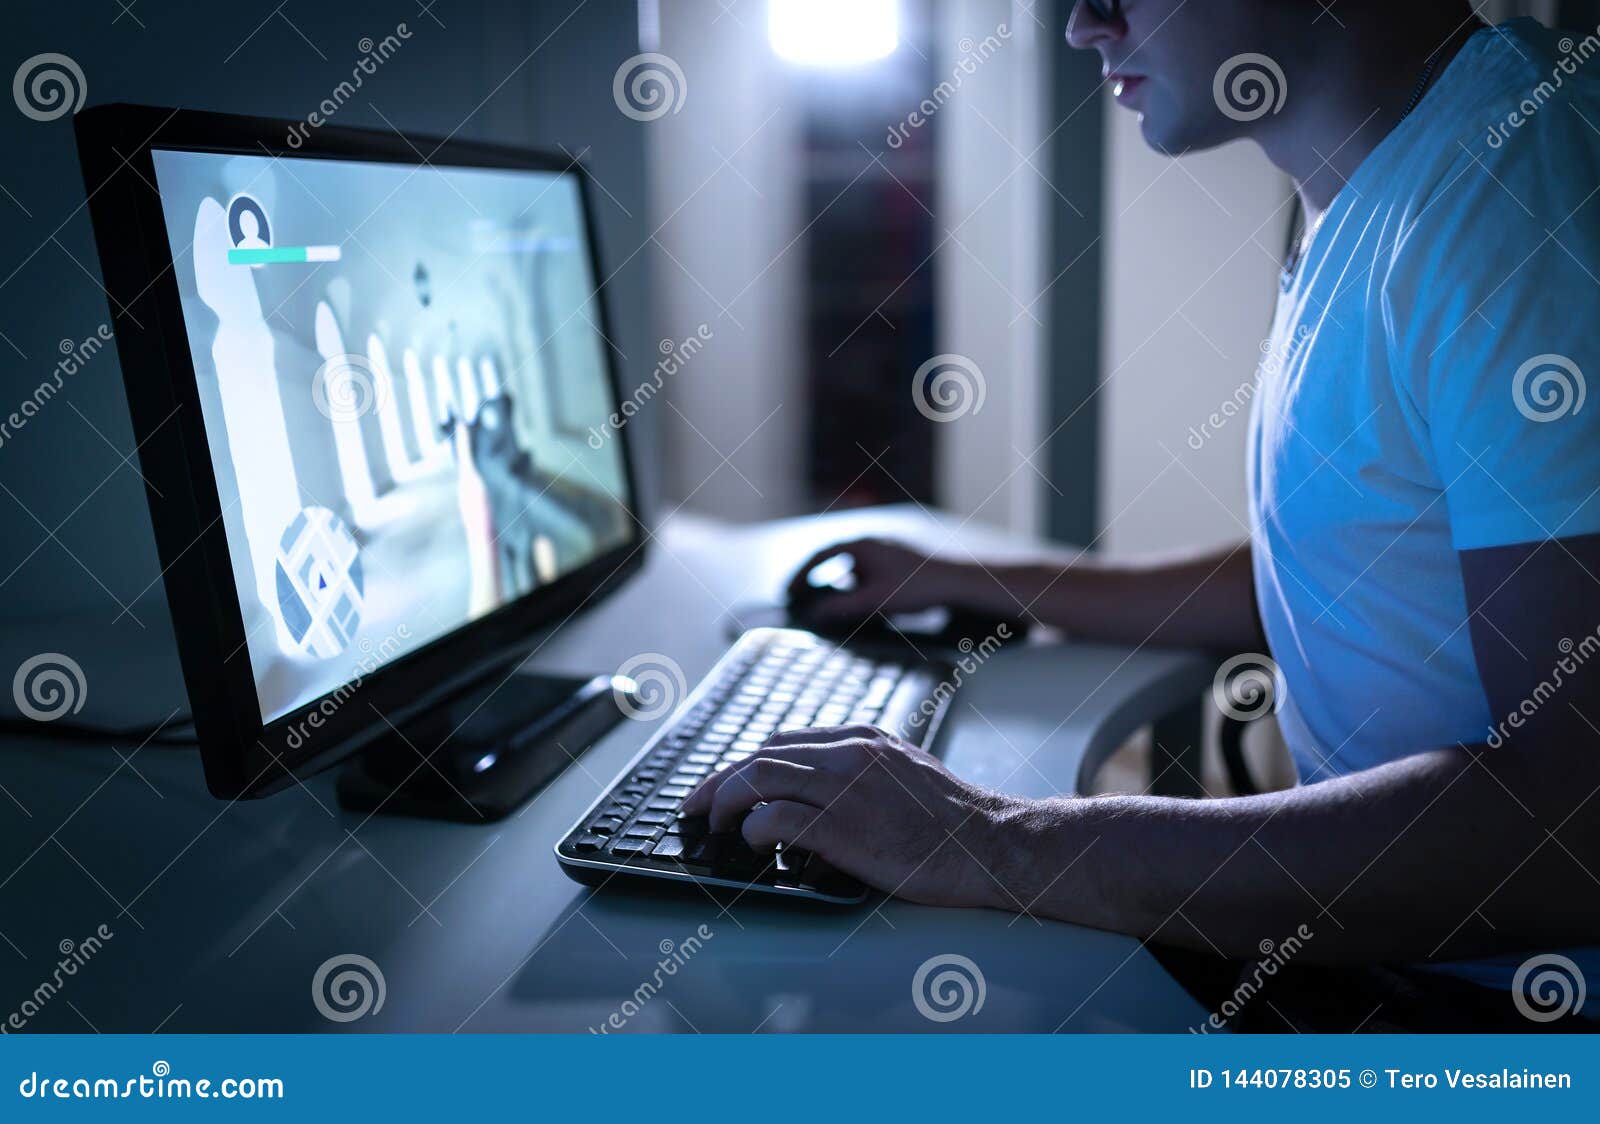 young man playing video game late at night at home. gamer streaming fps videogame online. first person shooter.